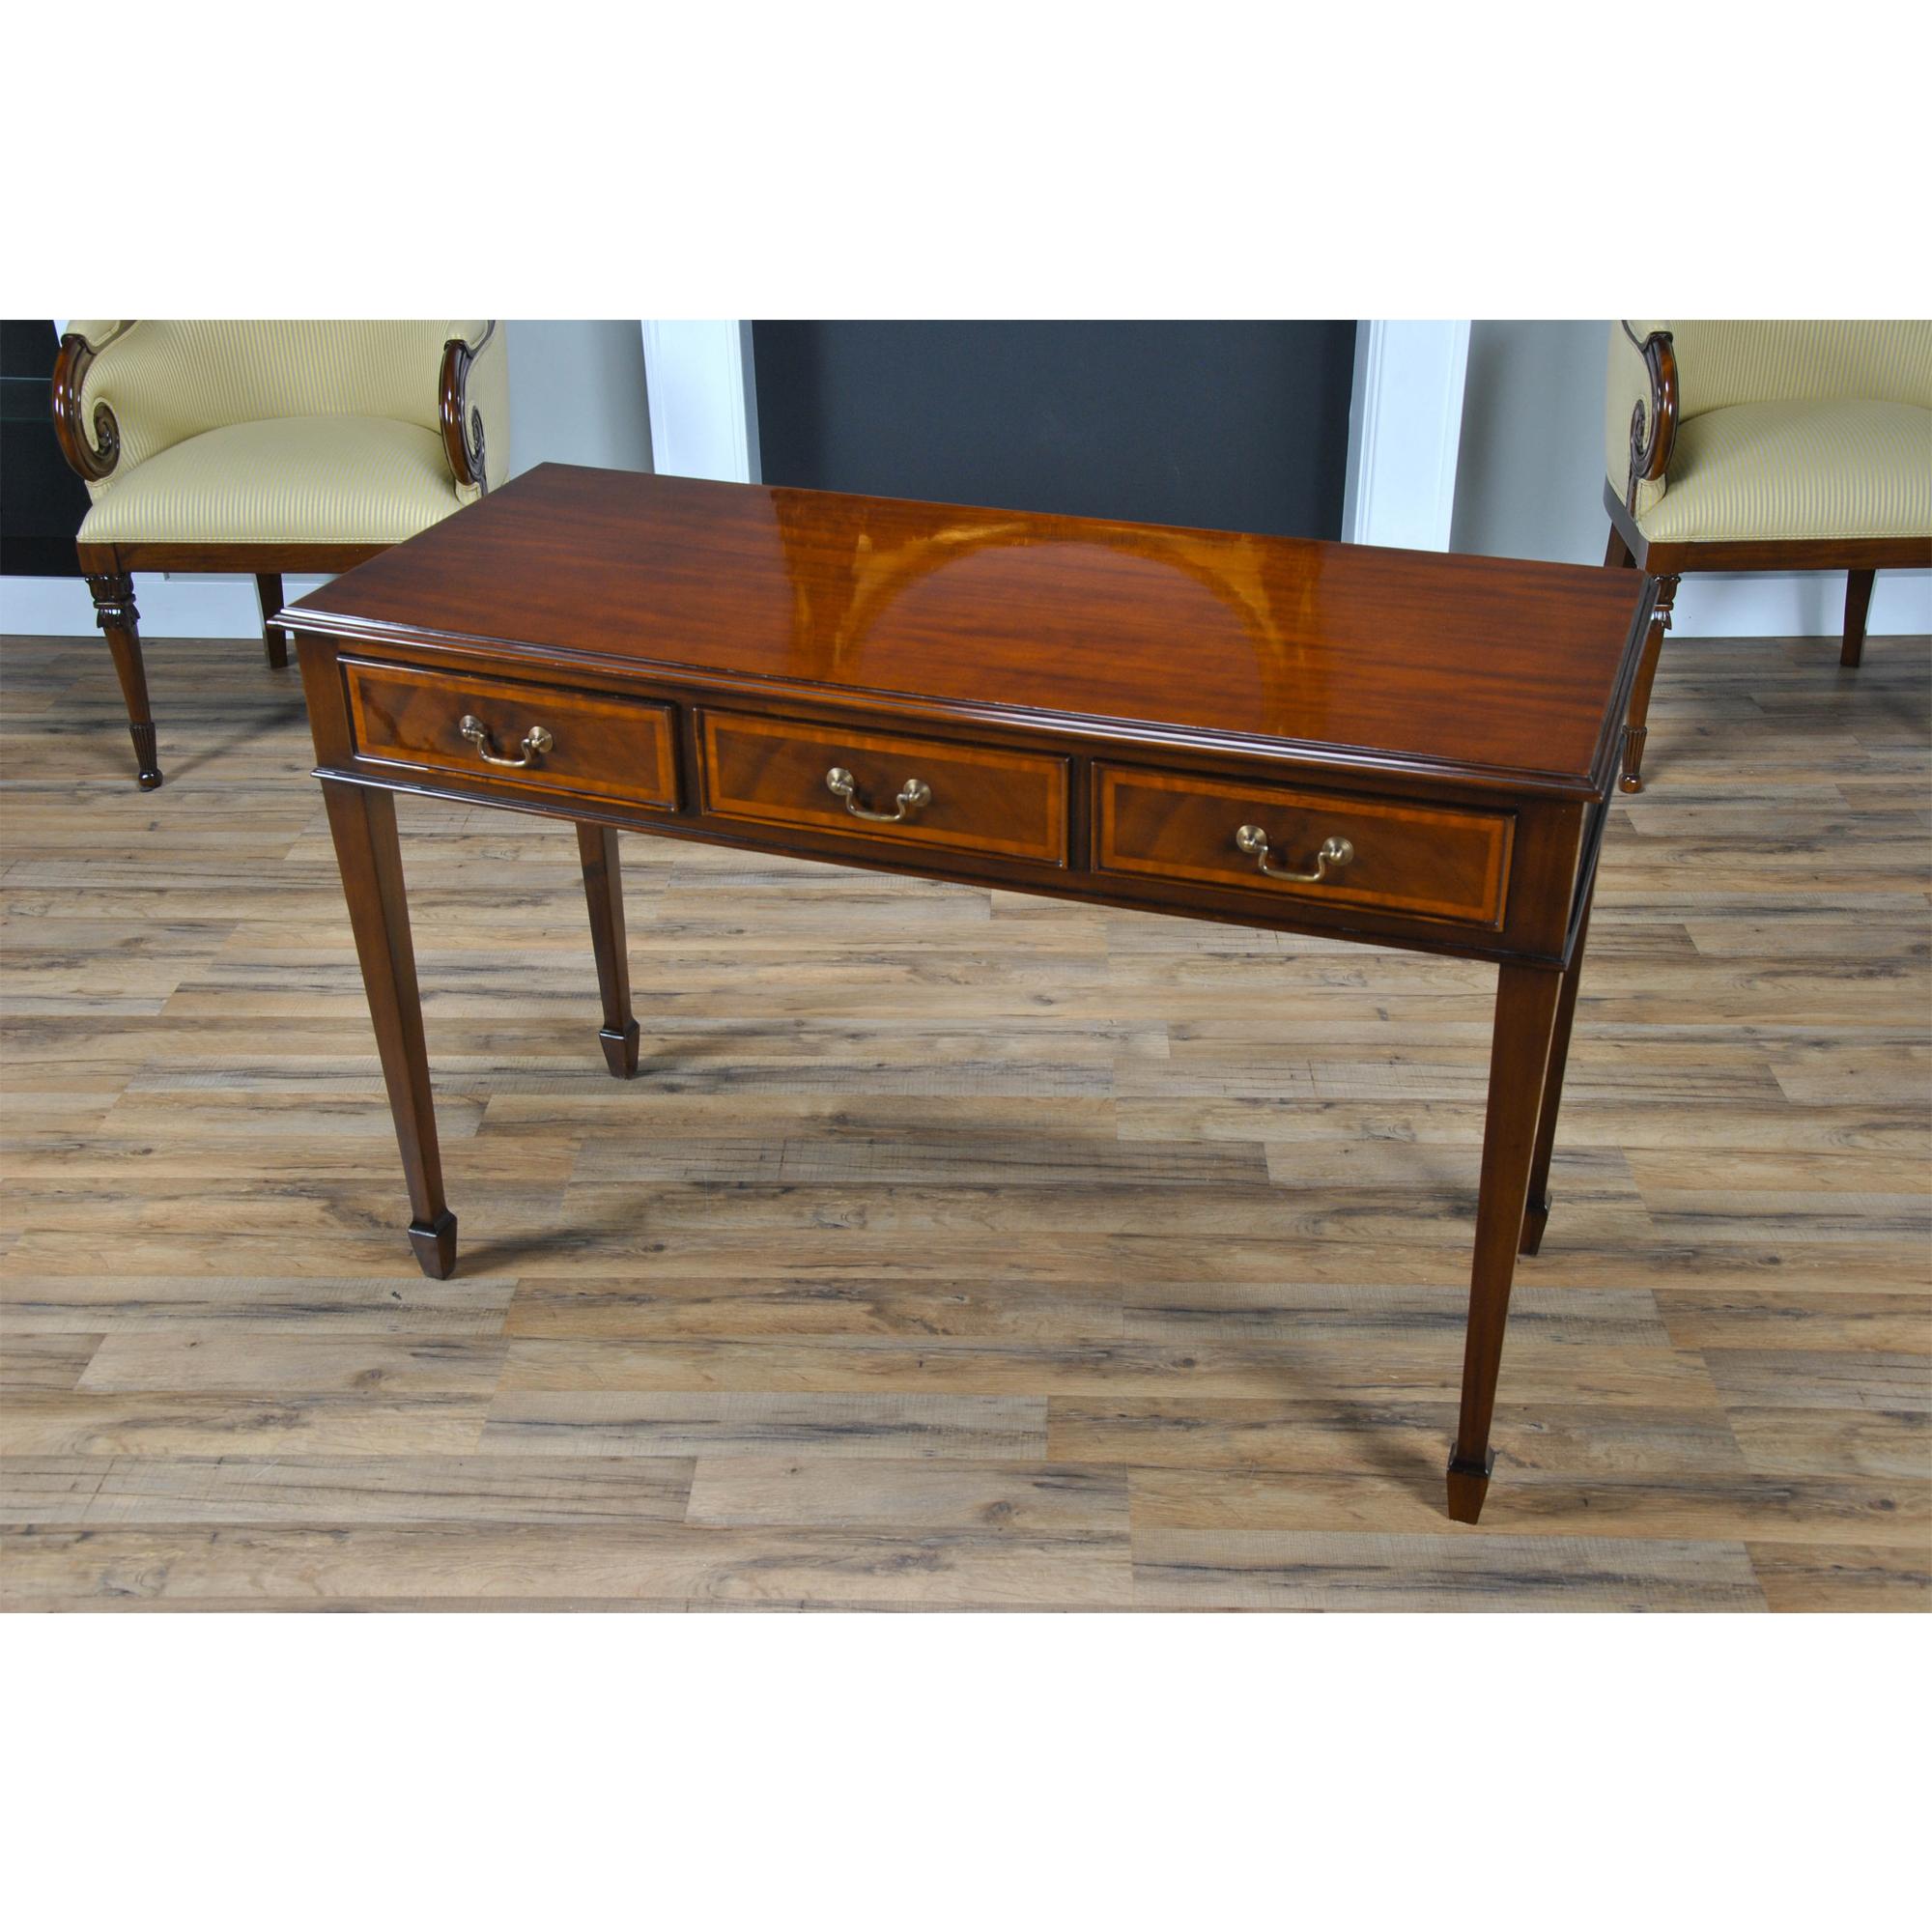 A gorgeous Large Mahogany Banded Console made of mahogany and satinwood with solid brass drawer pulls. The three dovetailed drawers denote high quality construction and the elegant tapered legs end in a popular spade foot design. The Large Mahogany